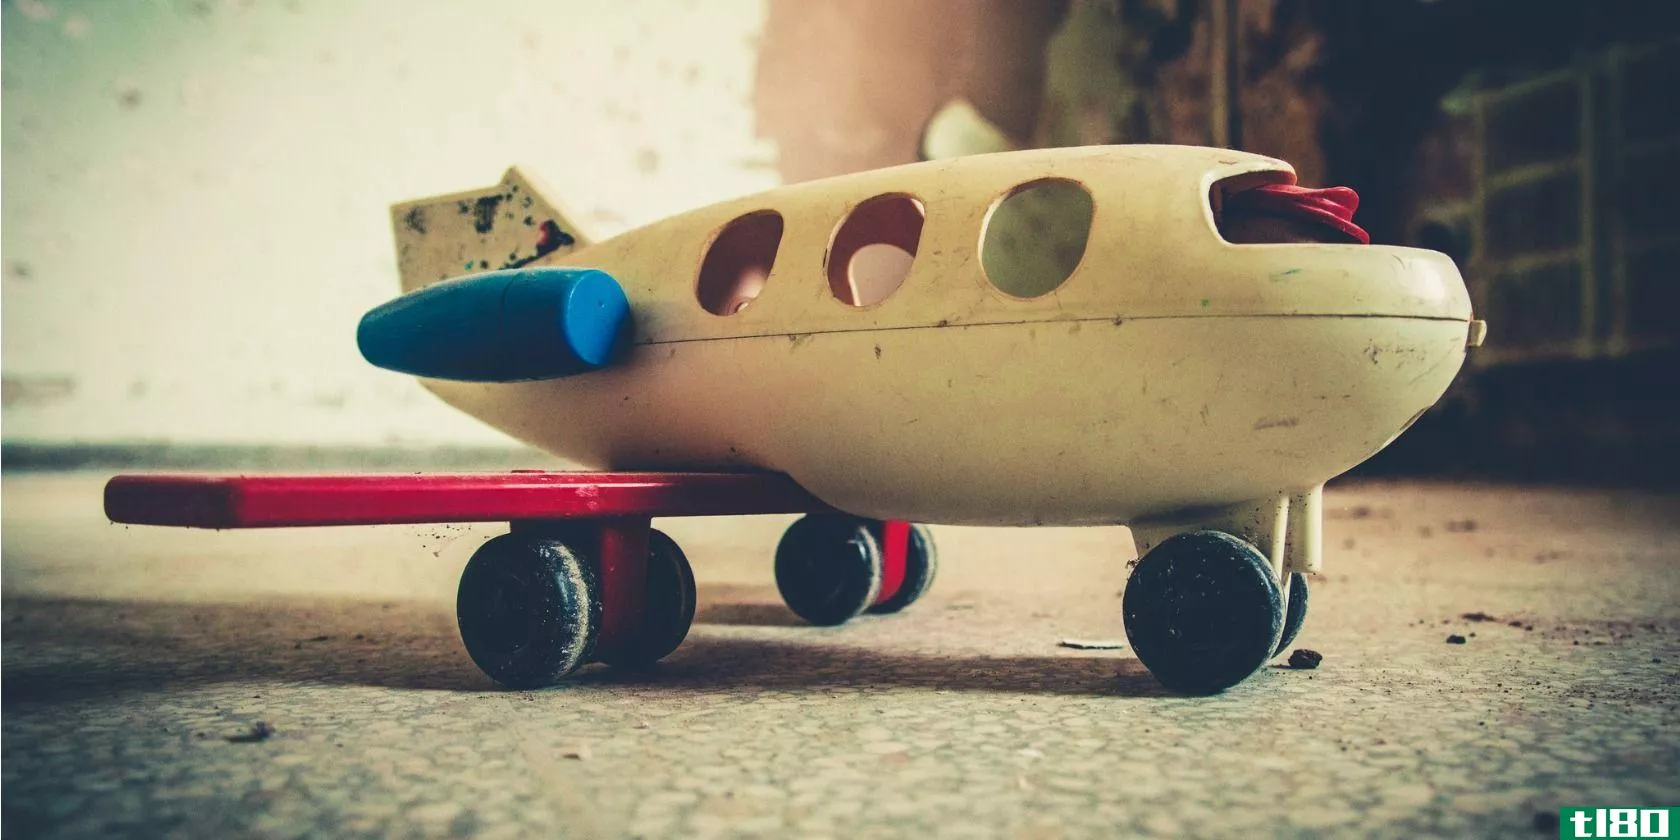 grounded-plane-toy